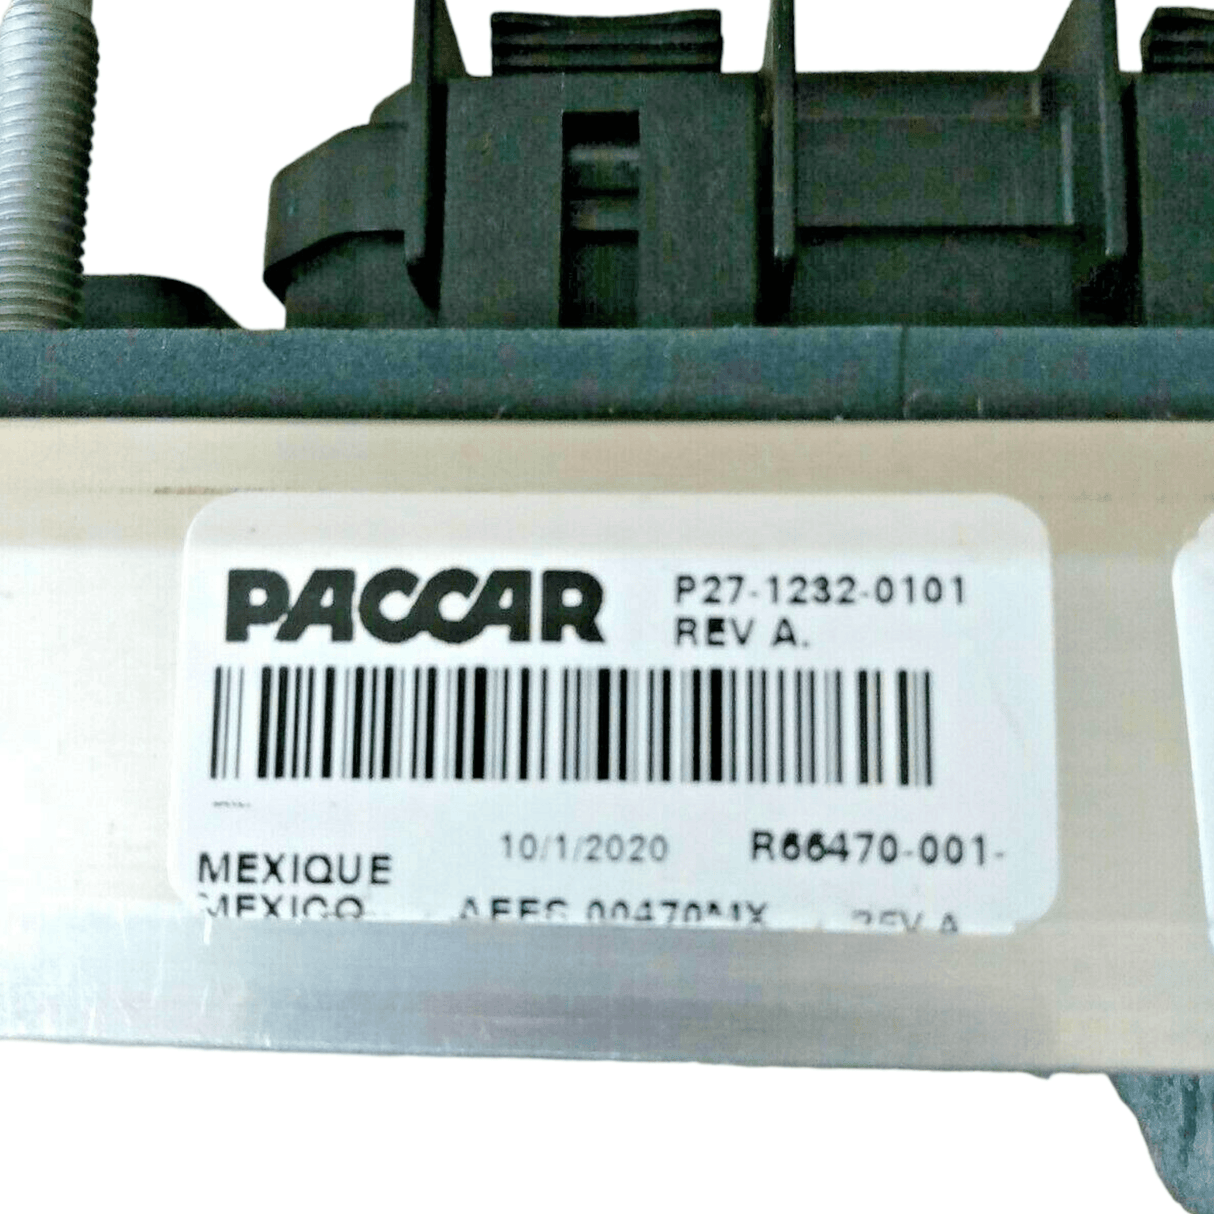 P27-1232-0101 Oem Paccar Fuse Box T680 For Kenworth.